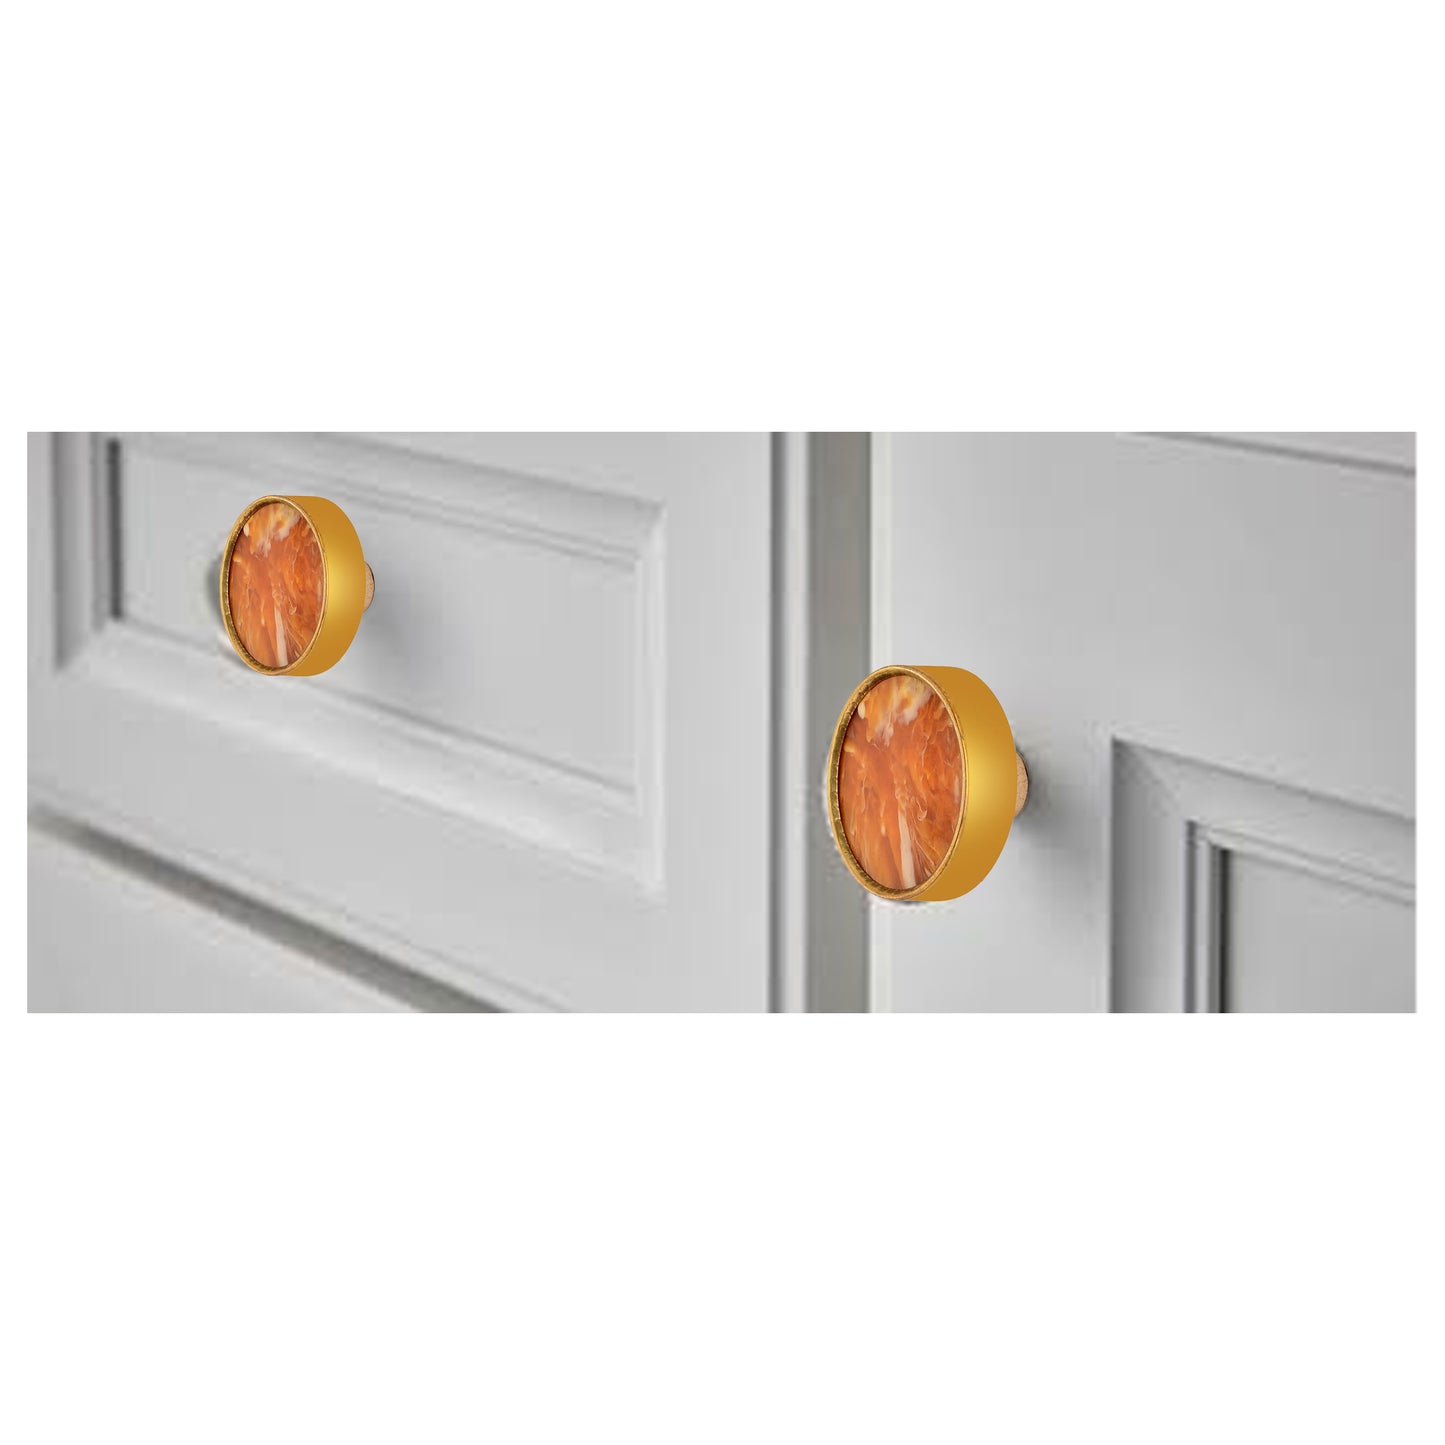 Mascot Hardware Moon Cloud 1-3/5 in. Cabinet Knob (Pack of 10)